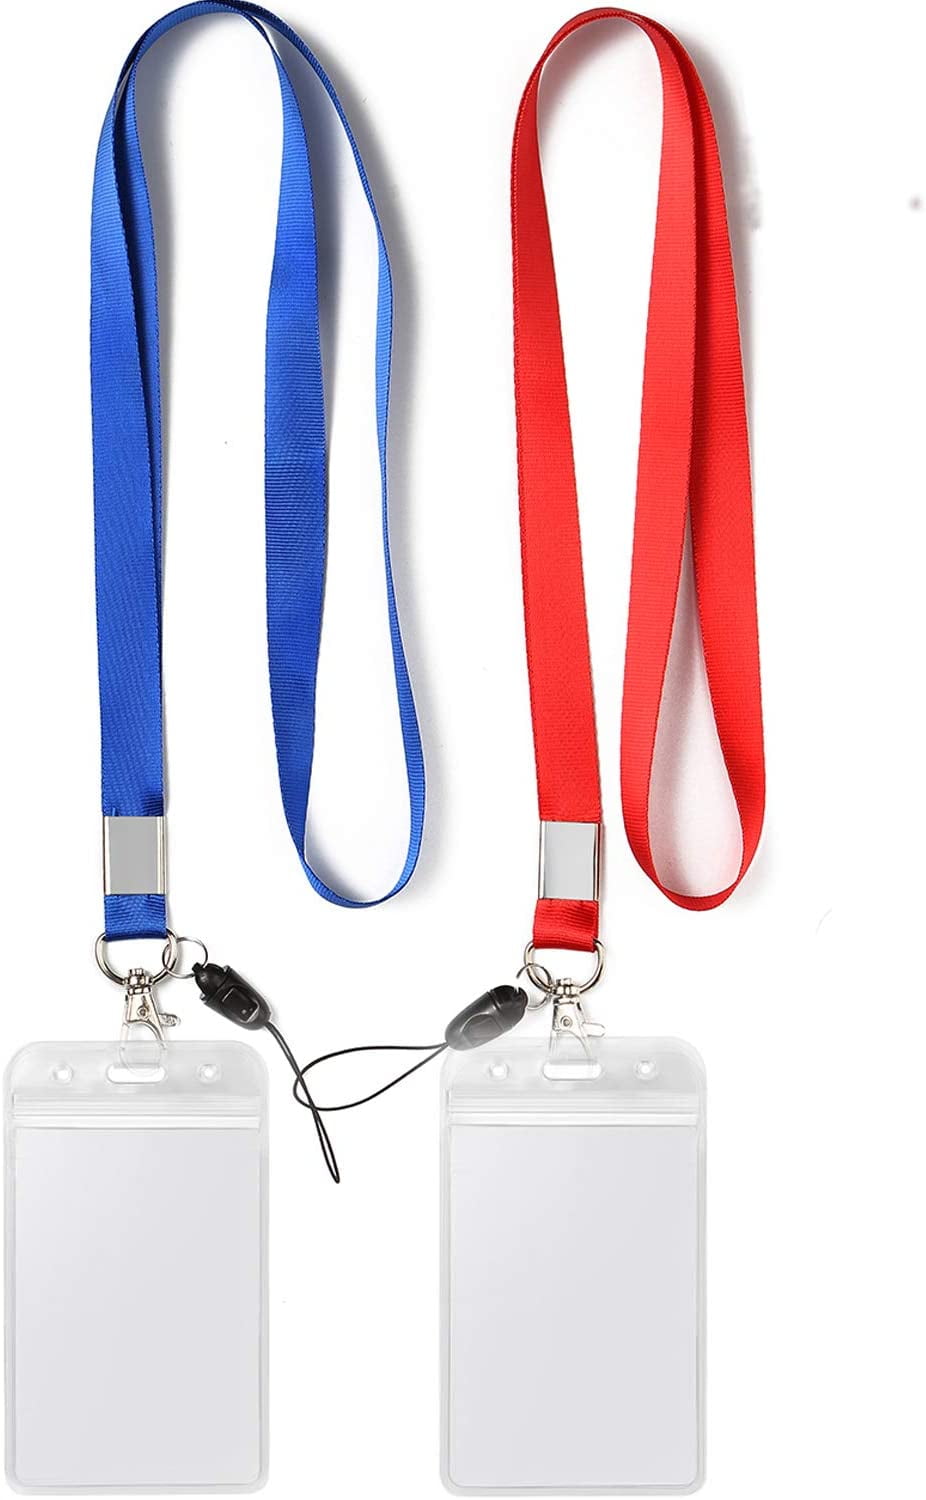 2 Pack Lanyard with ID Holder Red Lanyards for id Card Holder Office Lanyards for id Name Tag Card Holders - Walmart.com